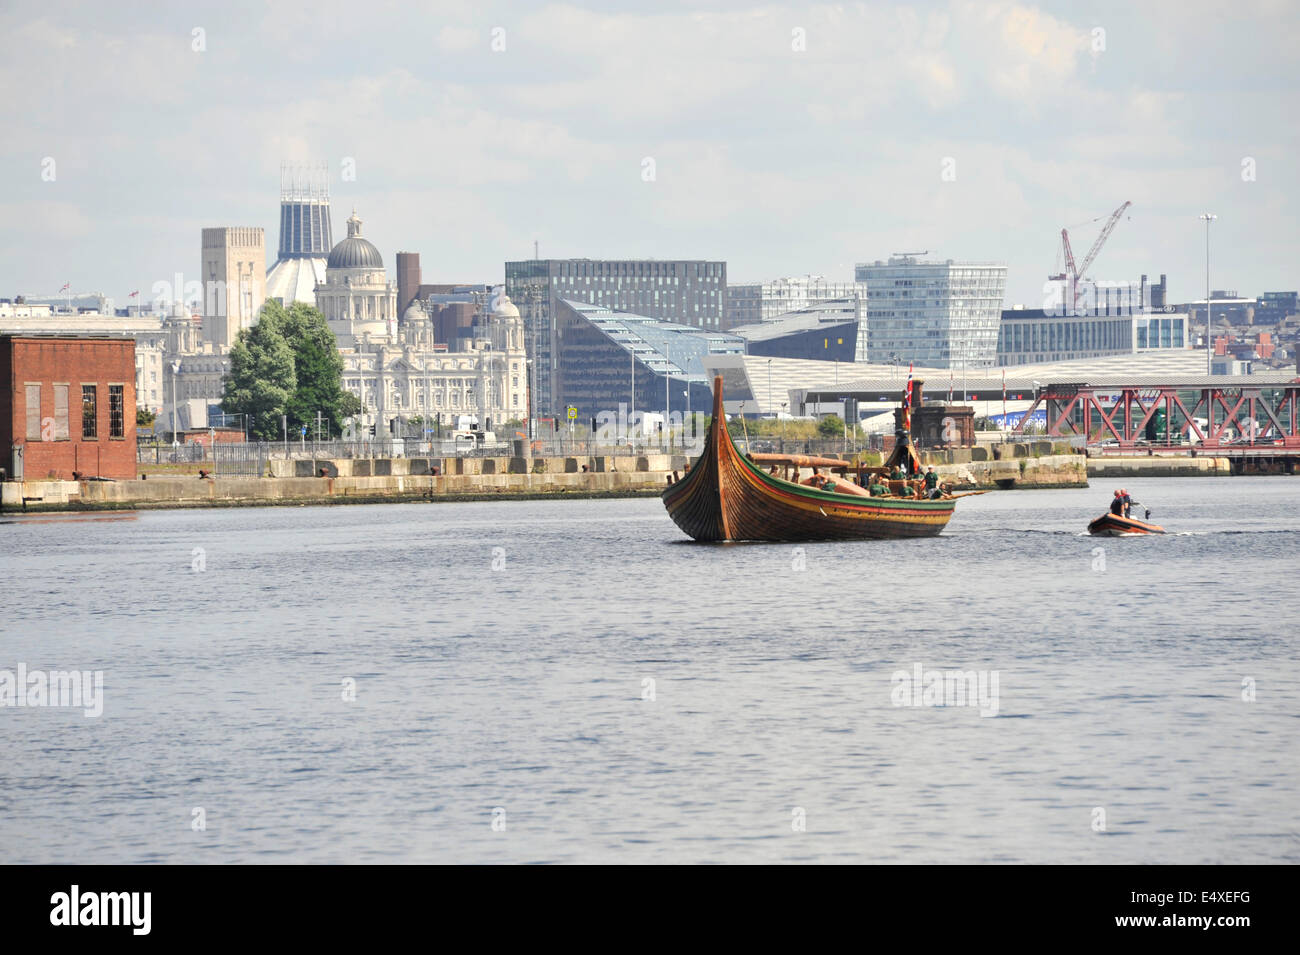 Liverpool, UK. 17th July, 2014. Worlds Largest reconstructed Viking Longship named Draken Harald Harfagre arrived on the River Mersey today from Norway. Credit:  GeoPic / Alamy Live News Stock Photo